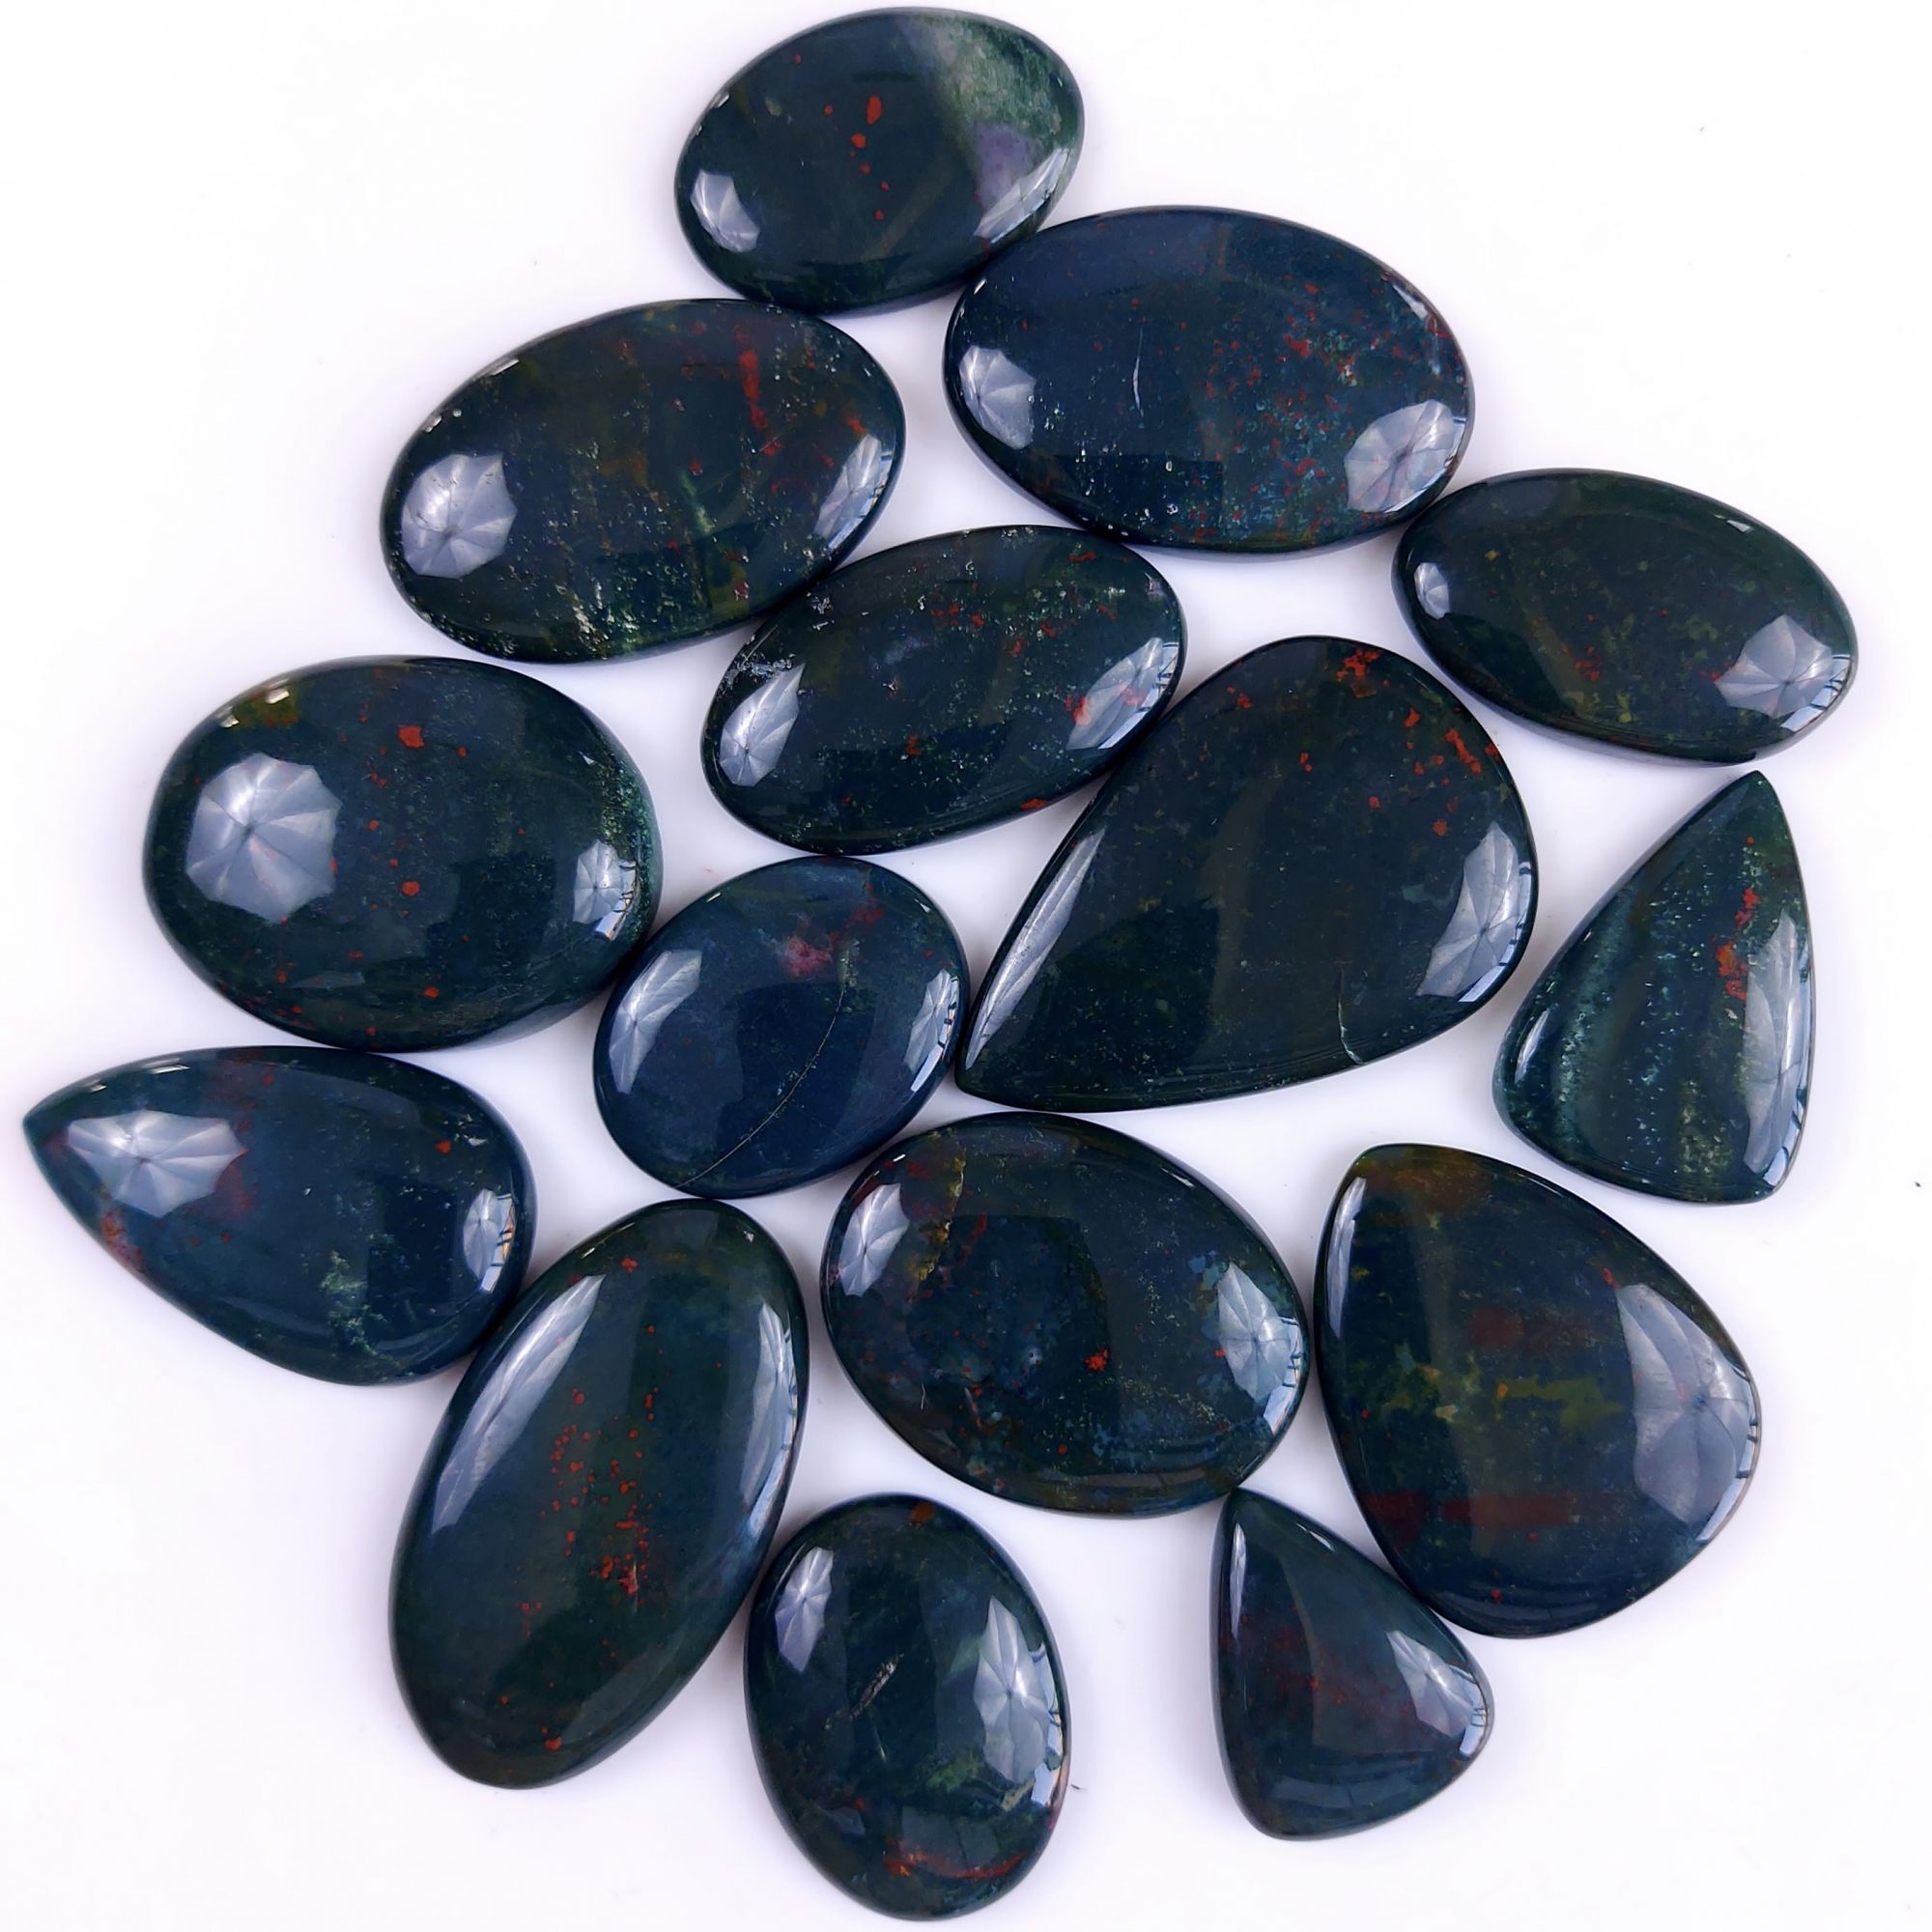 15Pcs 648Cts  Natural Green Blood Stone Loose Cabochon Gemstone Lot For Jewelry Making Gift For Her 45x30 25x21 mm#906